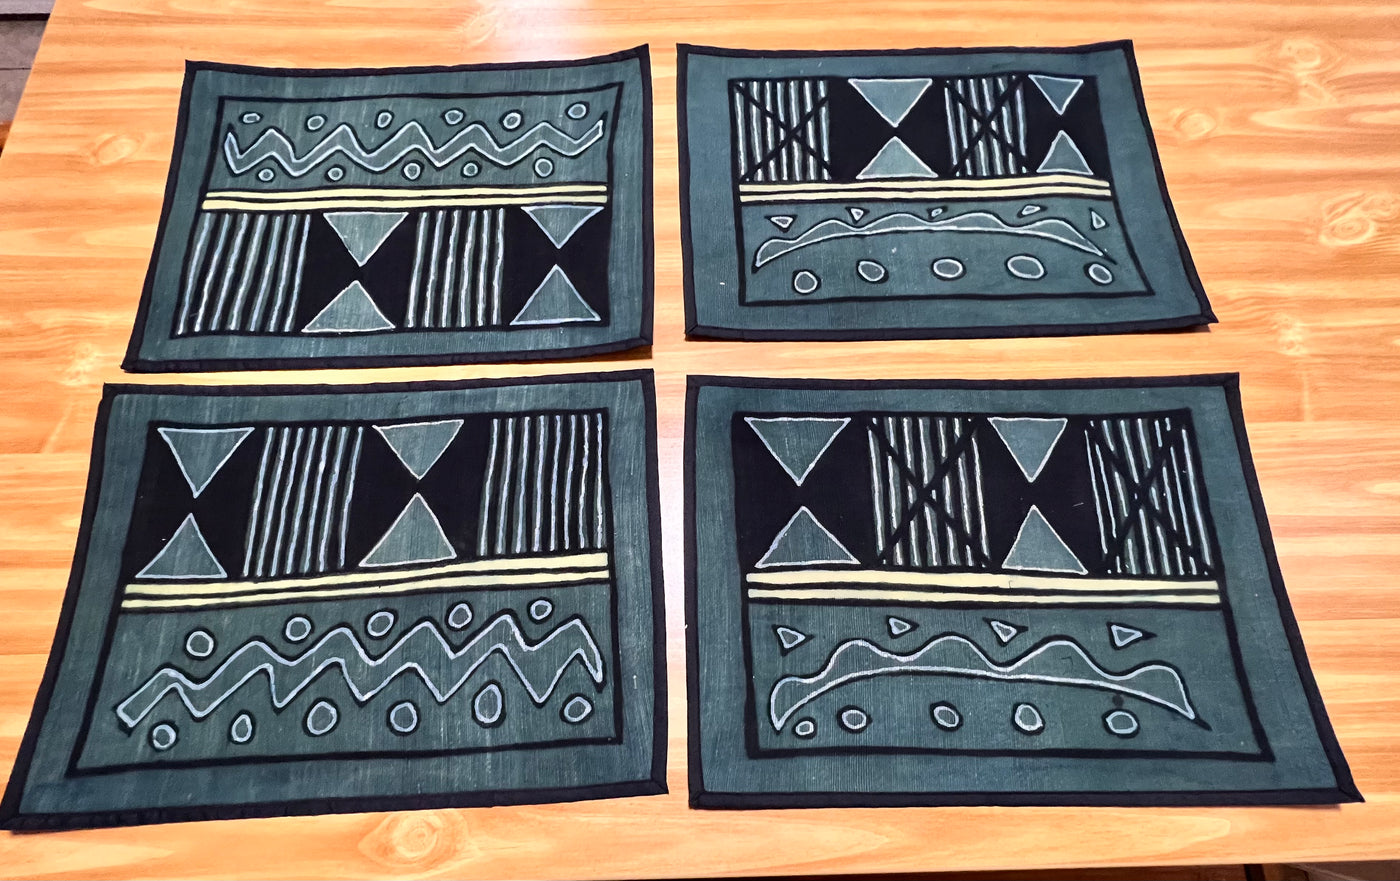 "Authentic Handmade Malian Mudcloth Placemat Collection"